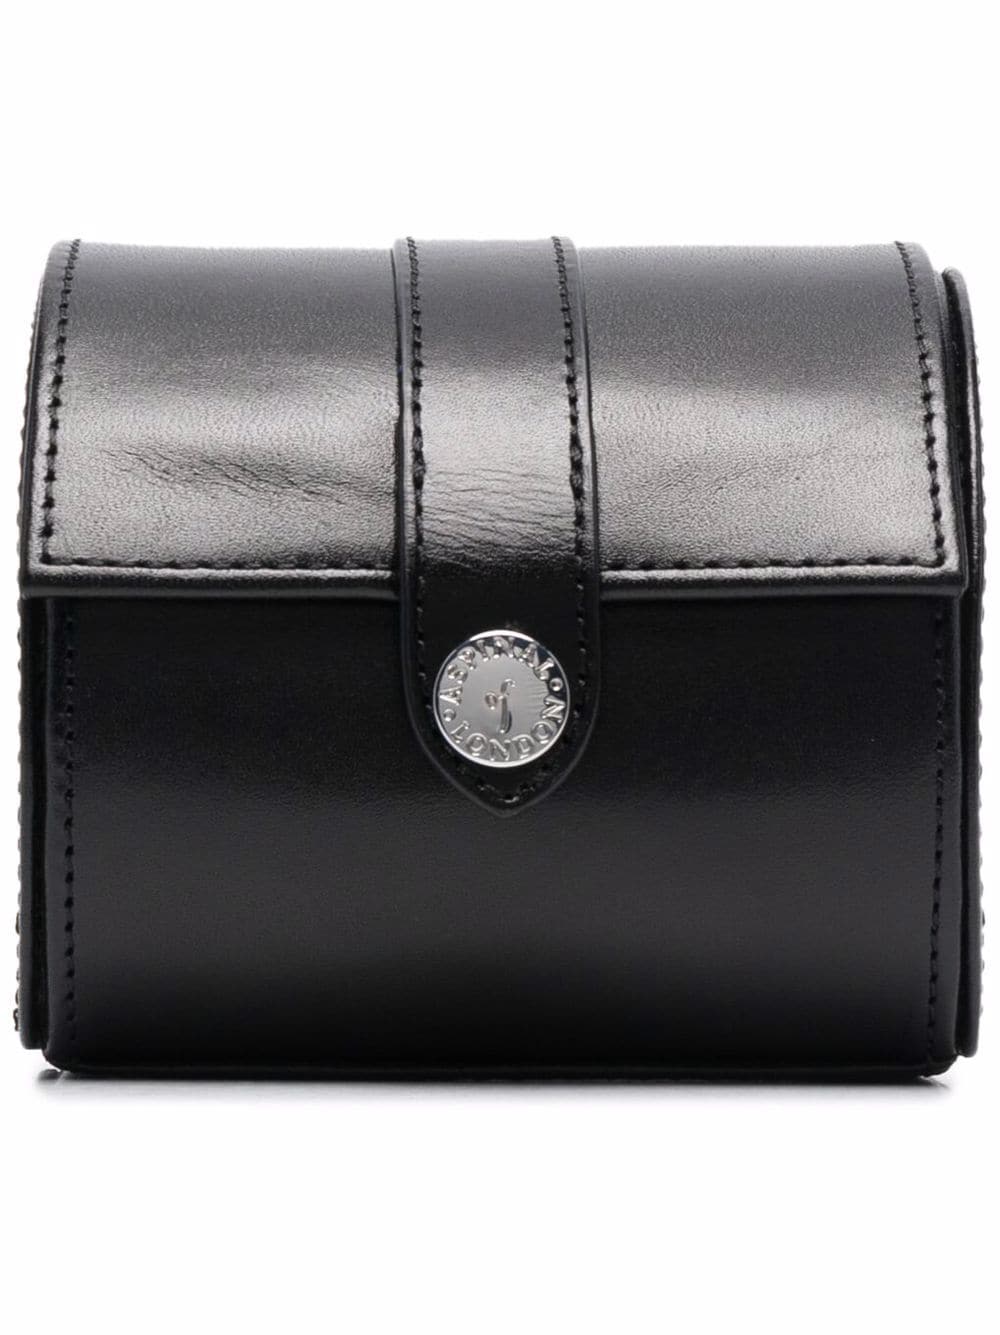 Aspinal Of London leather watch roll - Black von Aspinal Of London